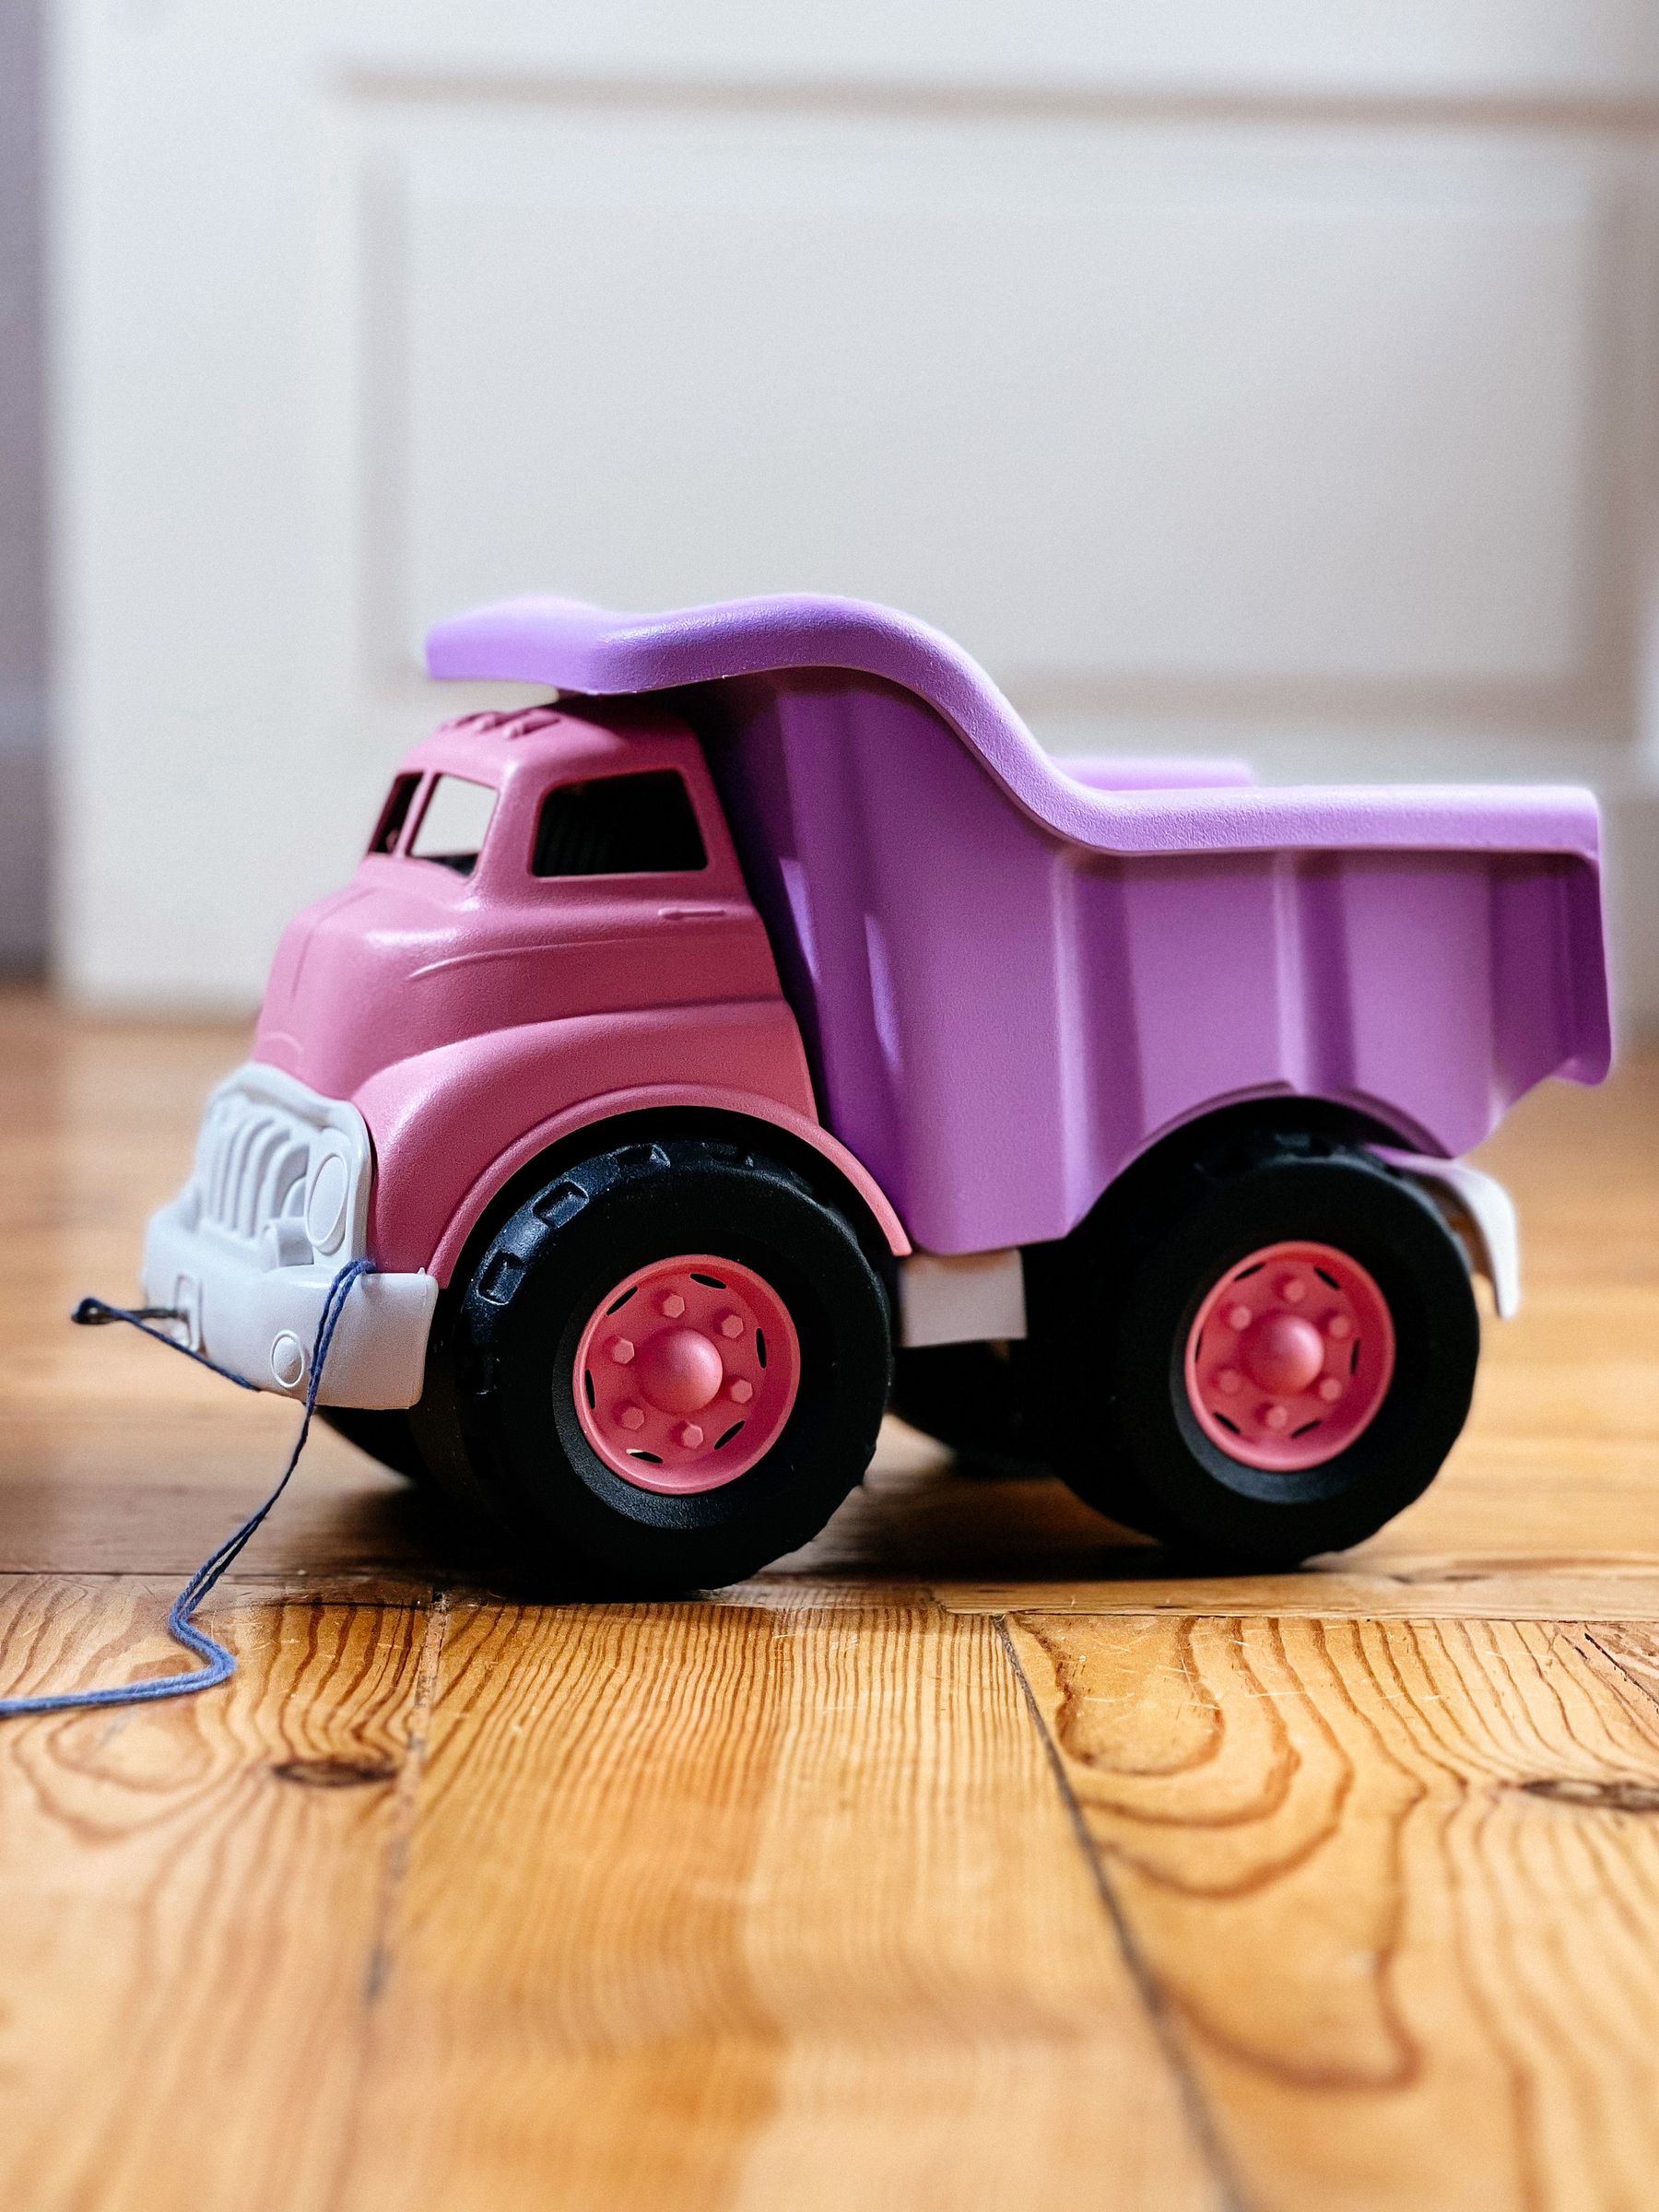 A pink and purple toy truck